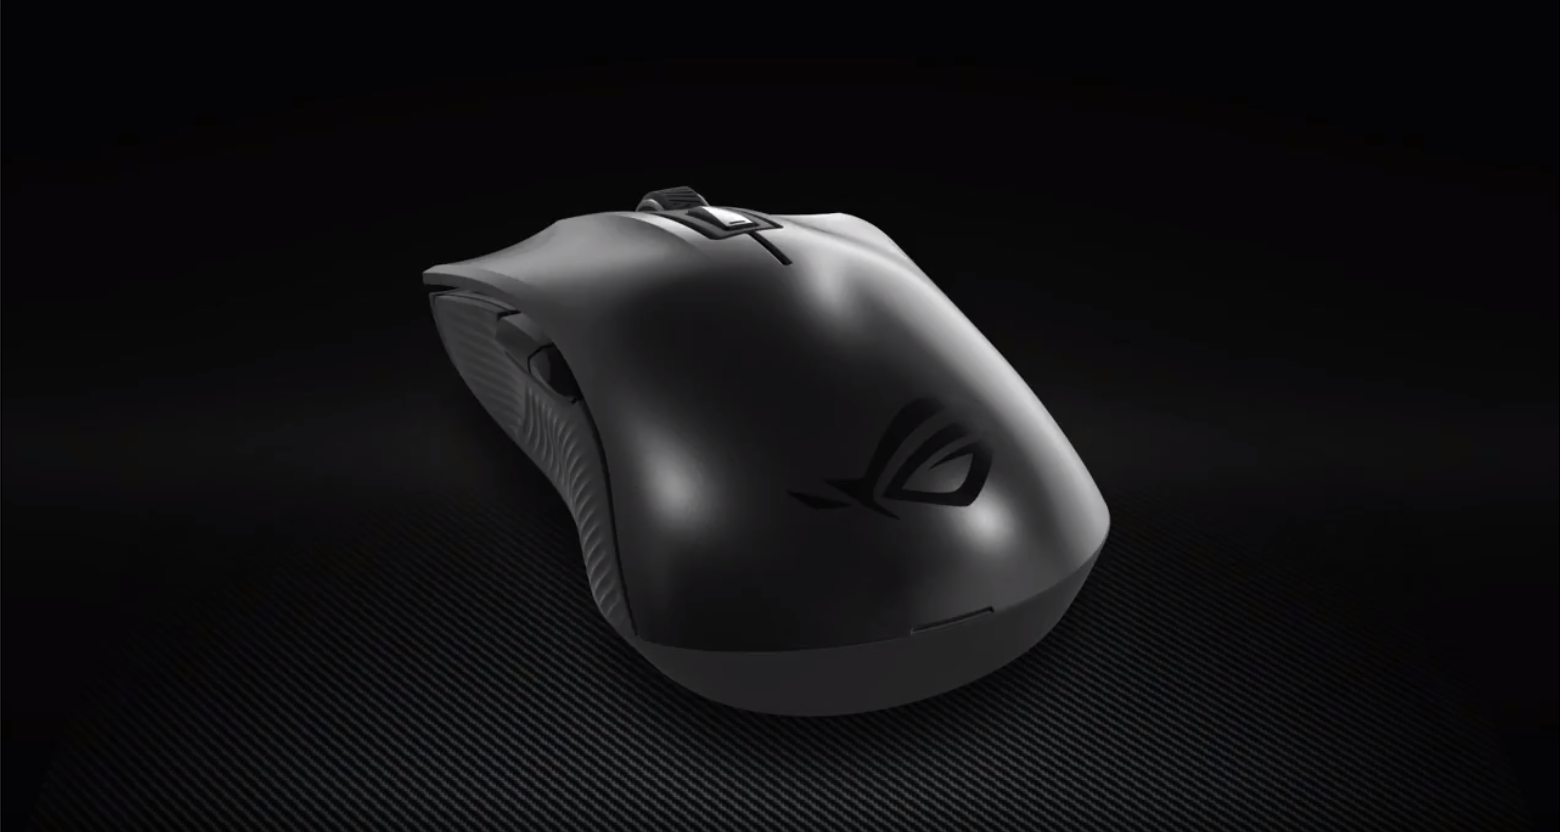 Rog Strix Carry Ergonomic Right Handed Gaming Mice Mouse Pads Rog Republic Of Gamers Rog Global